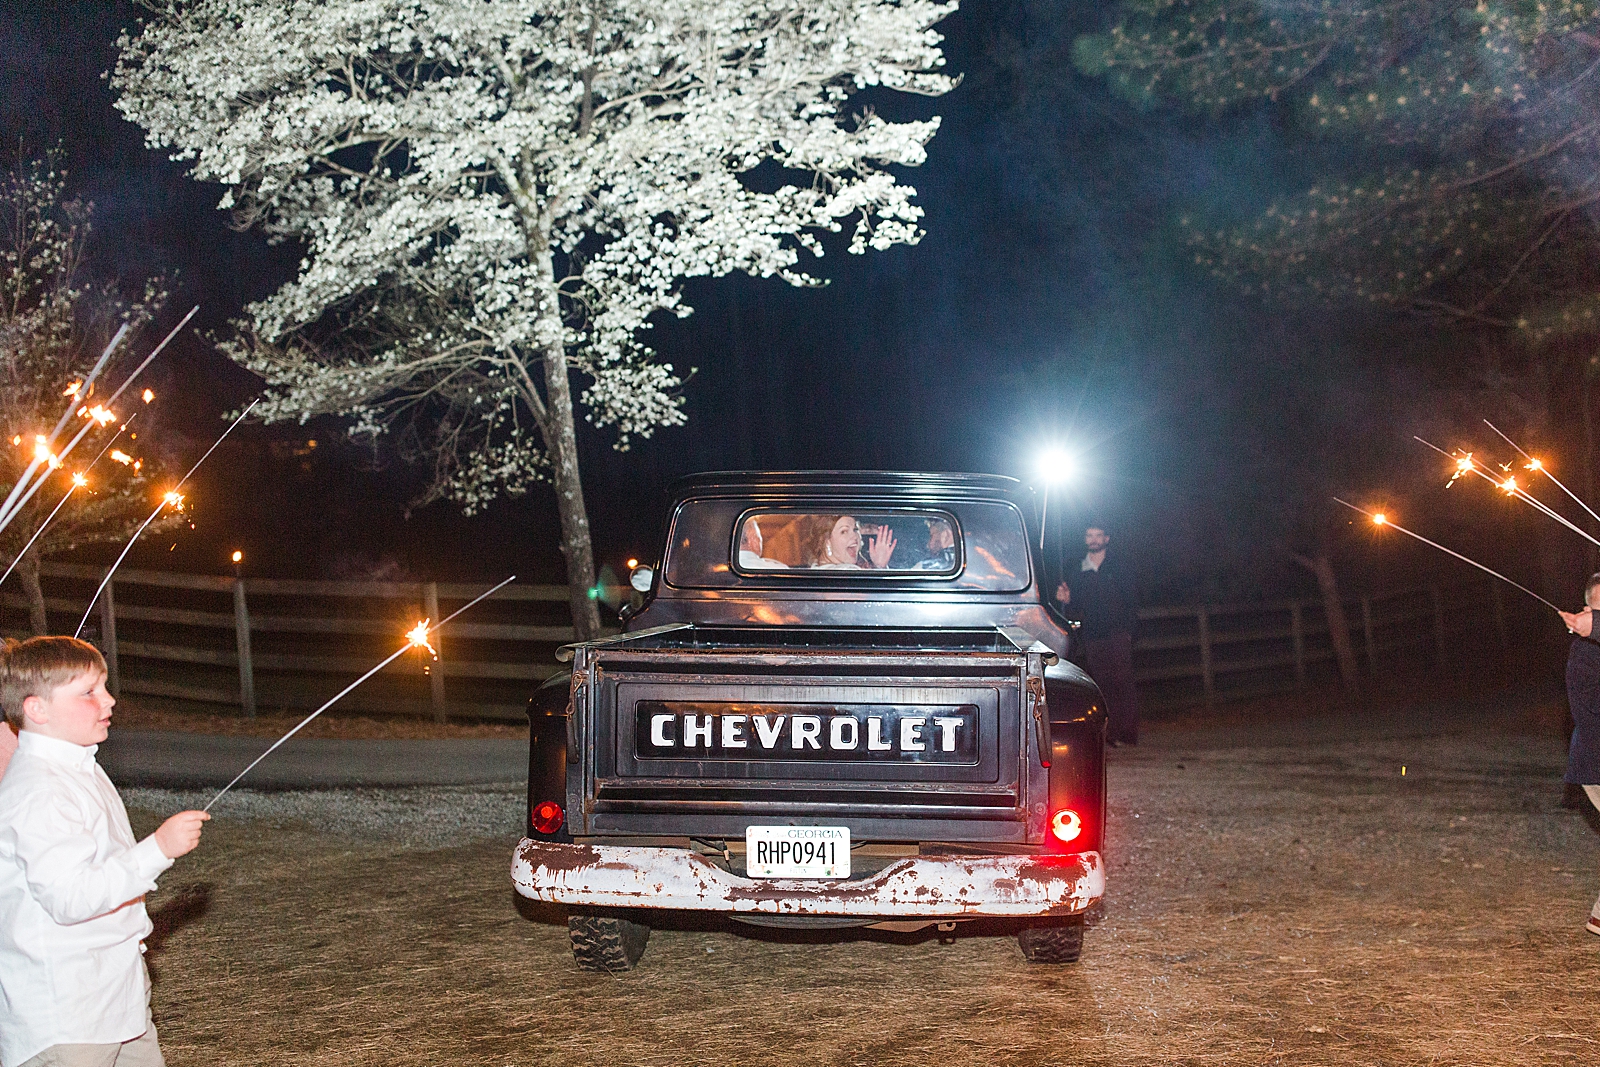 Macedonia Hills Wedding Reception Bride Waving in back of Chevy truck Photo